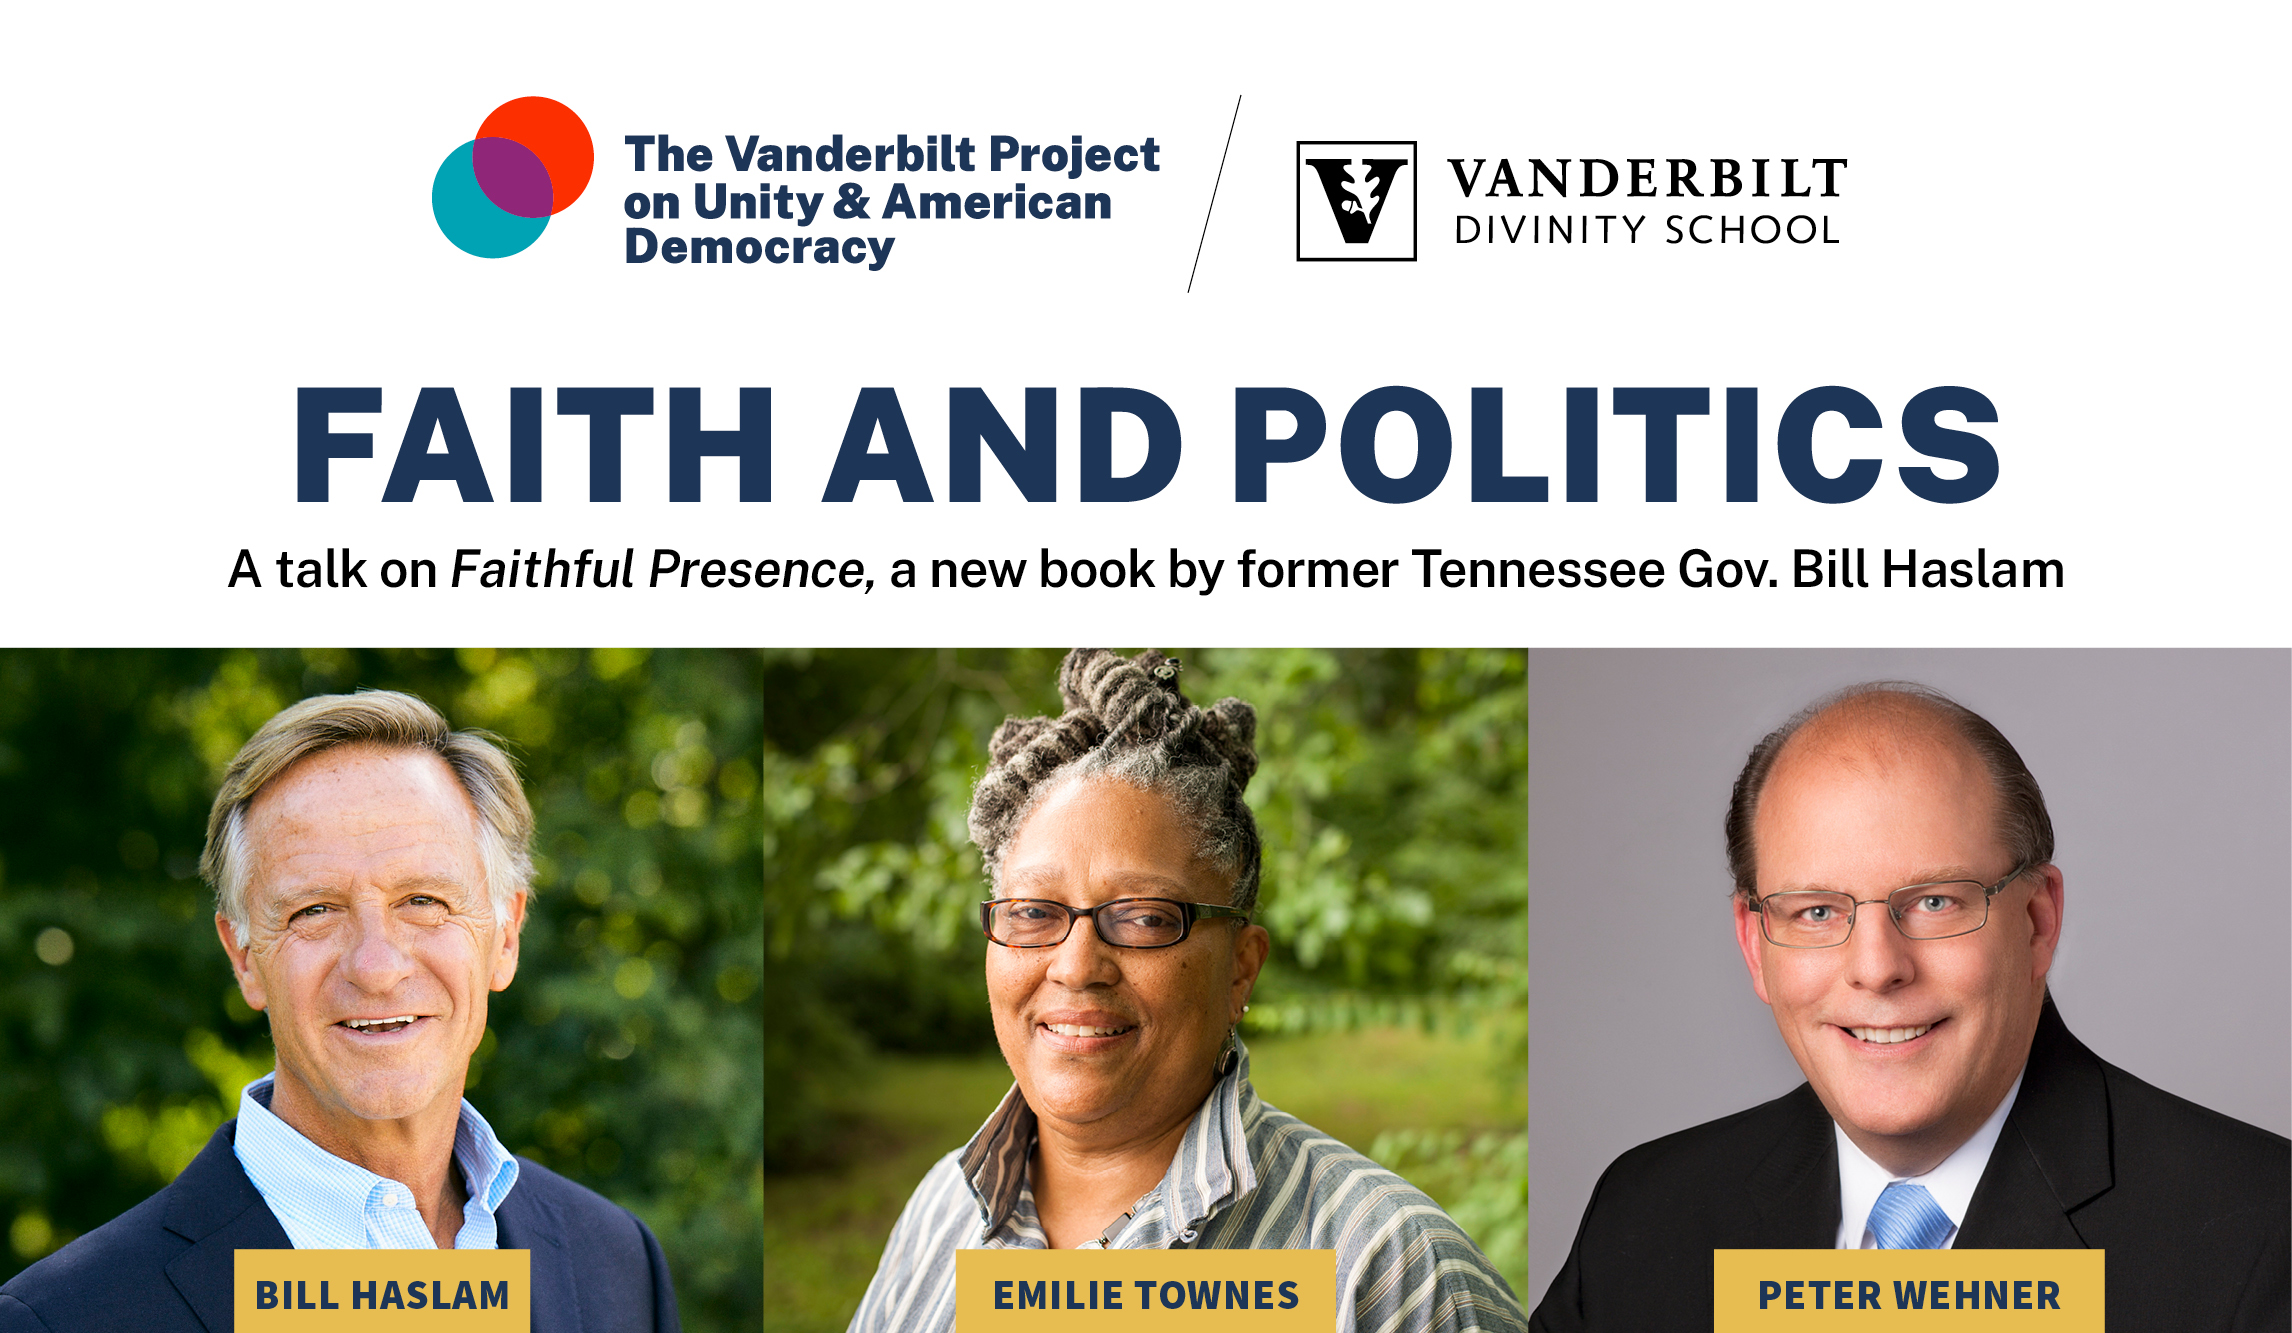 May 25: The Vanderbilt Project on Unity and American Democracy to host book launch and talk on ‘Faithful Presence’ with author Gov. Bill Haslam